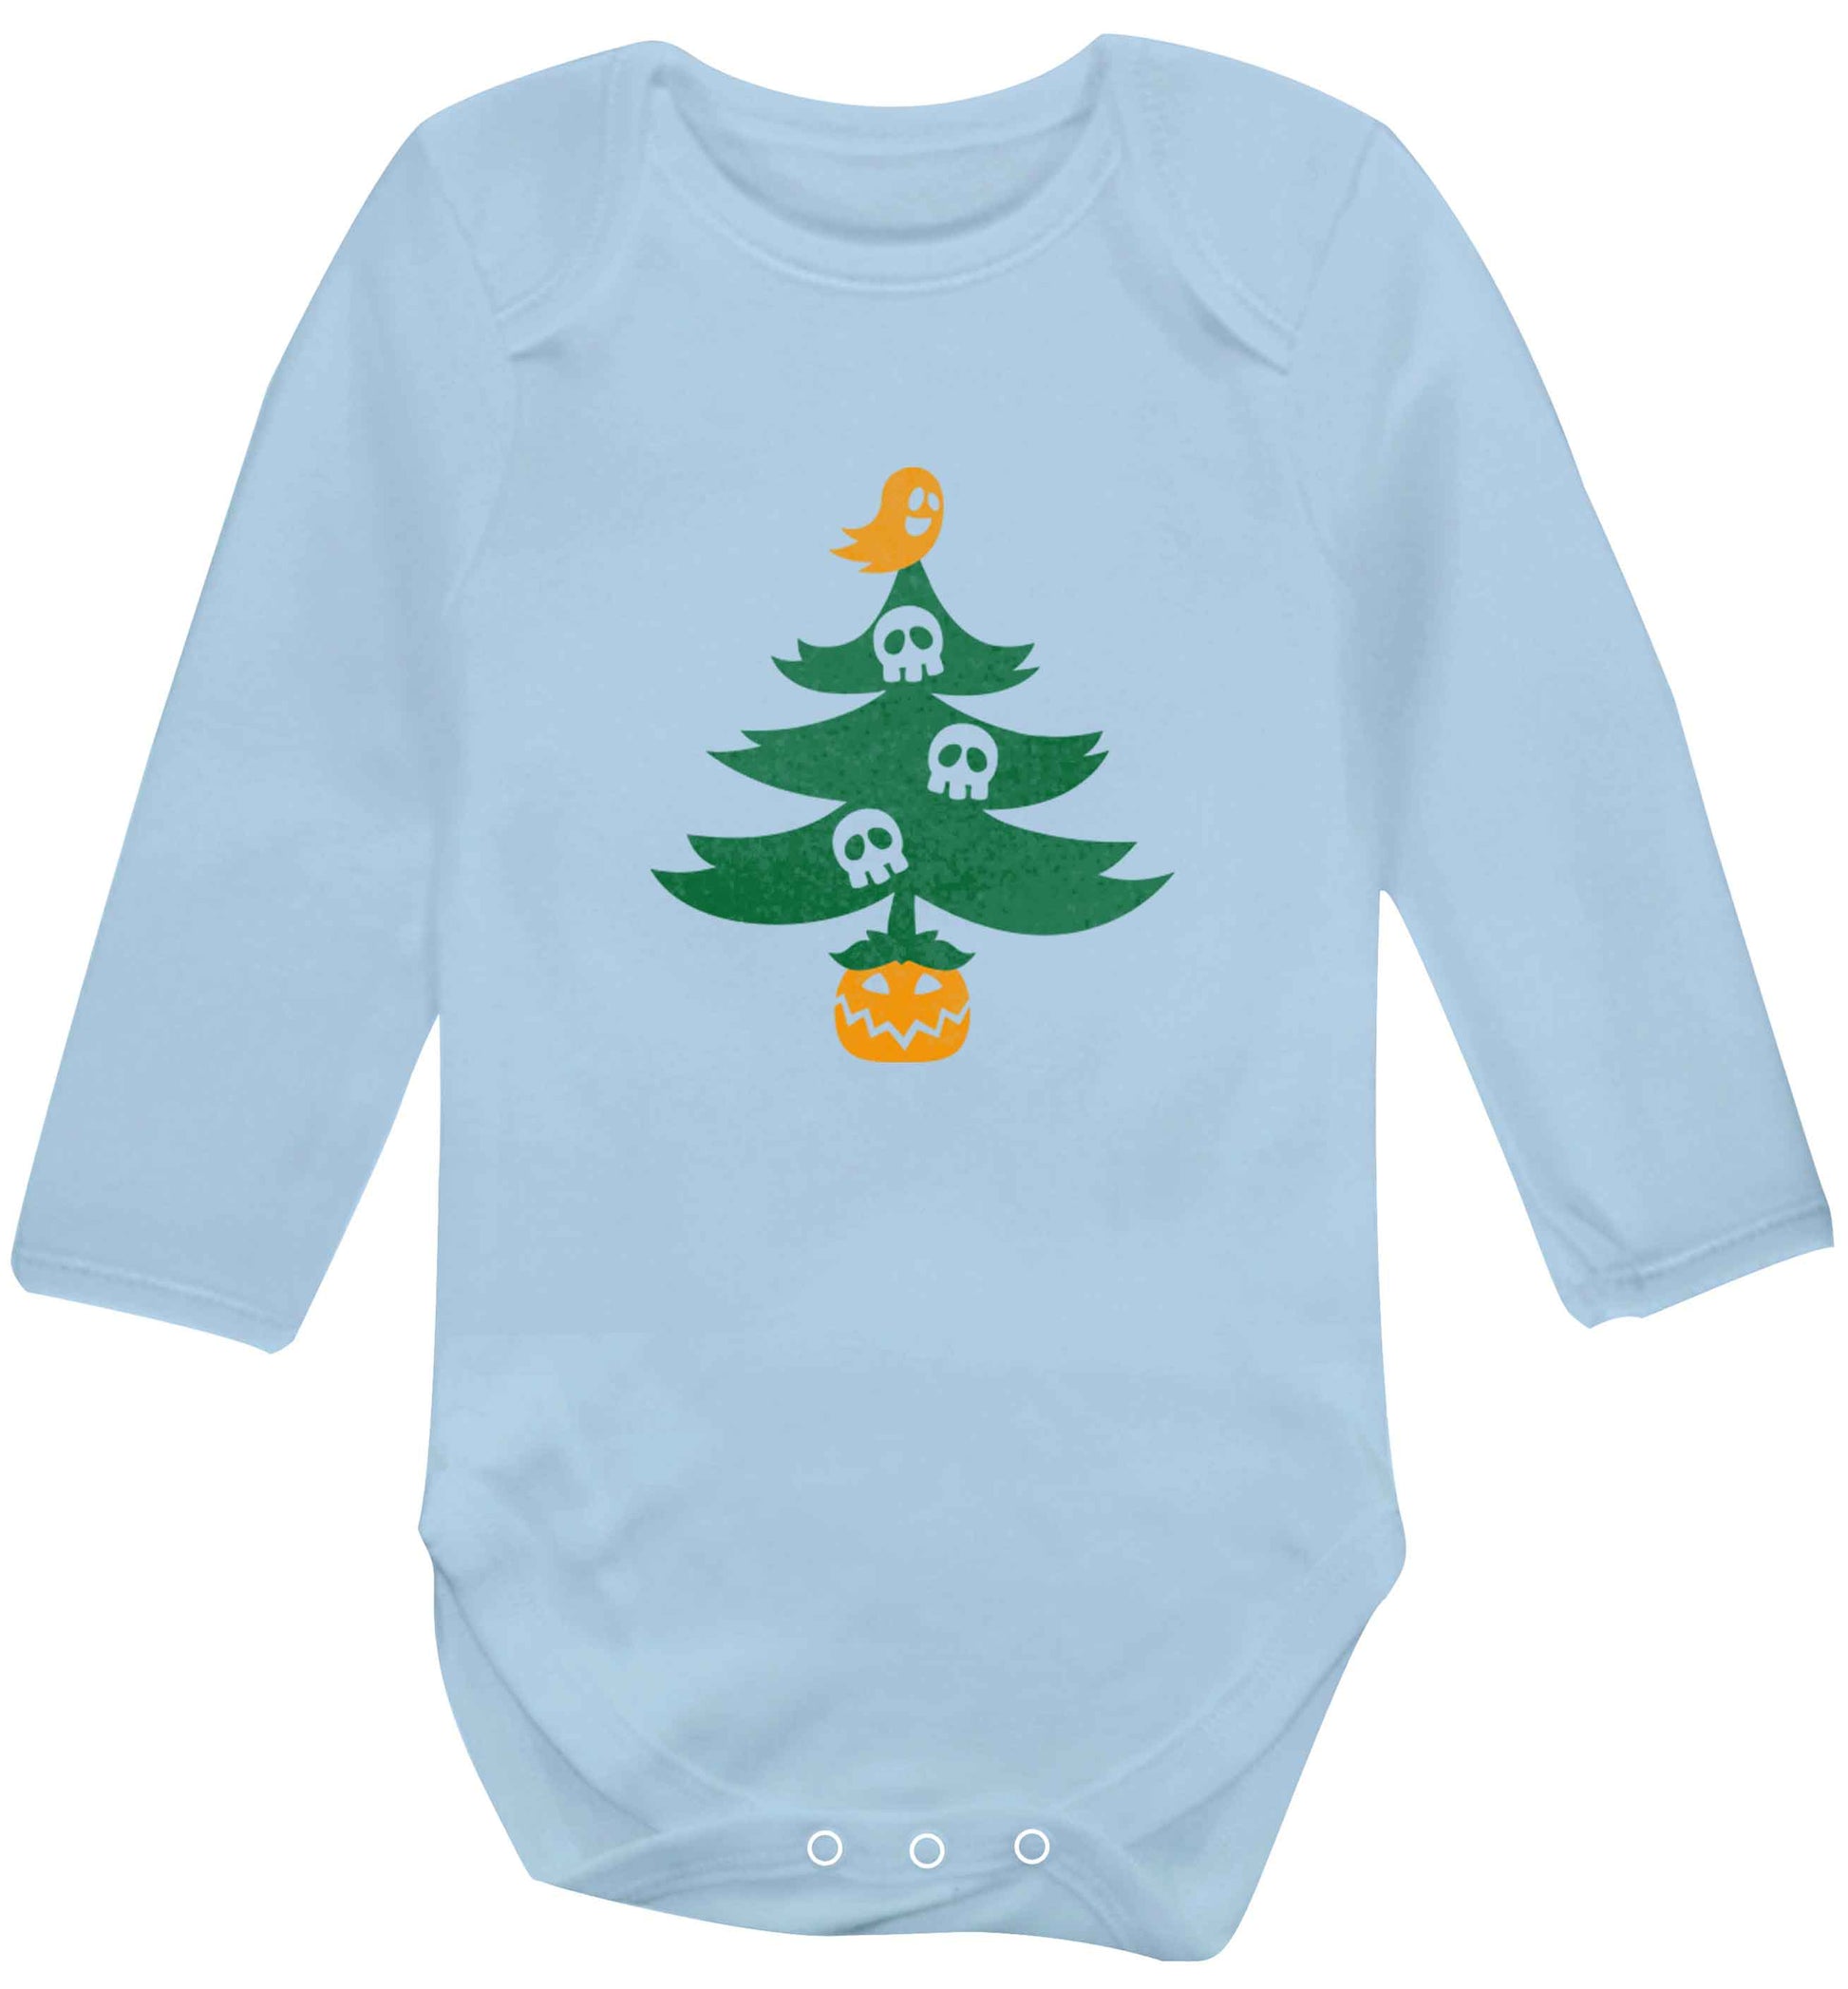 Halloween Christmas tree baby vest long sleeved pale blue 6-12 months